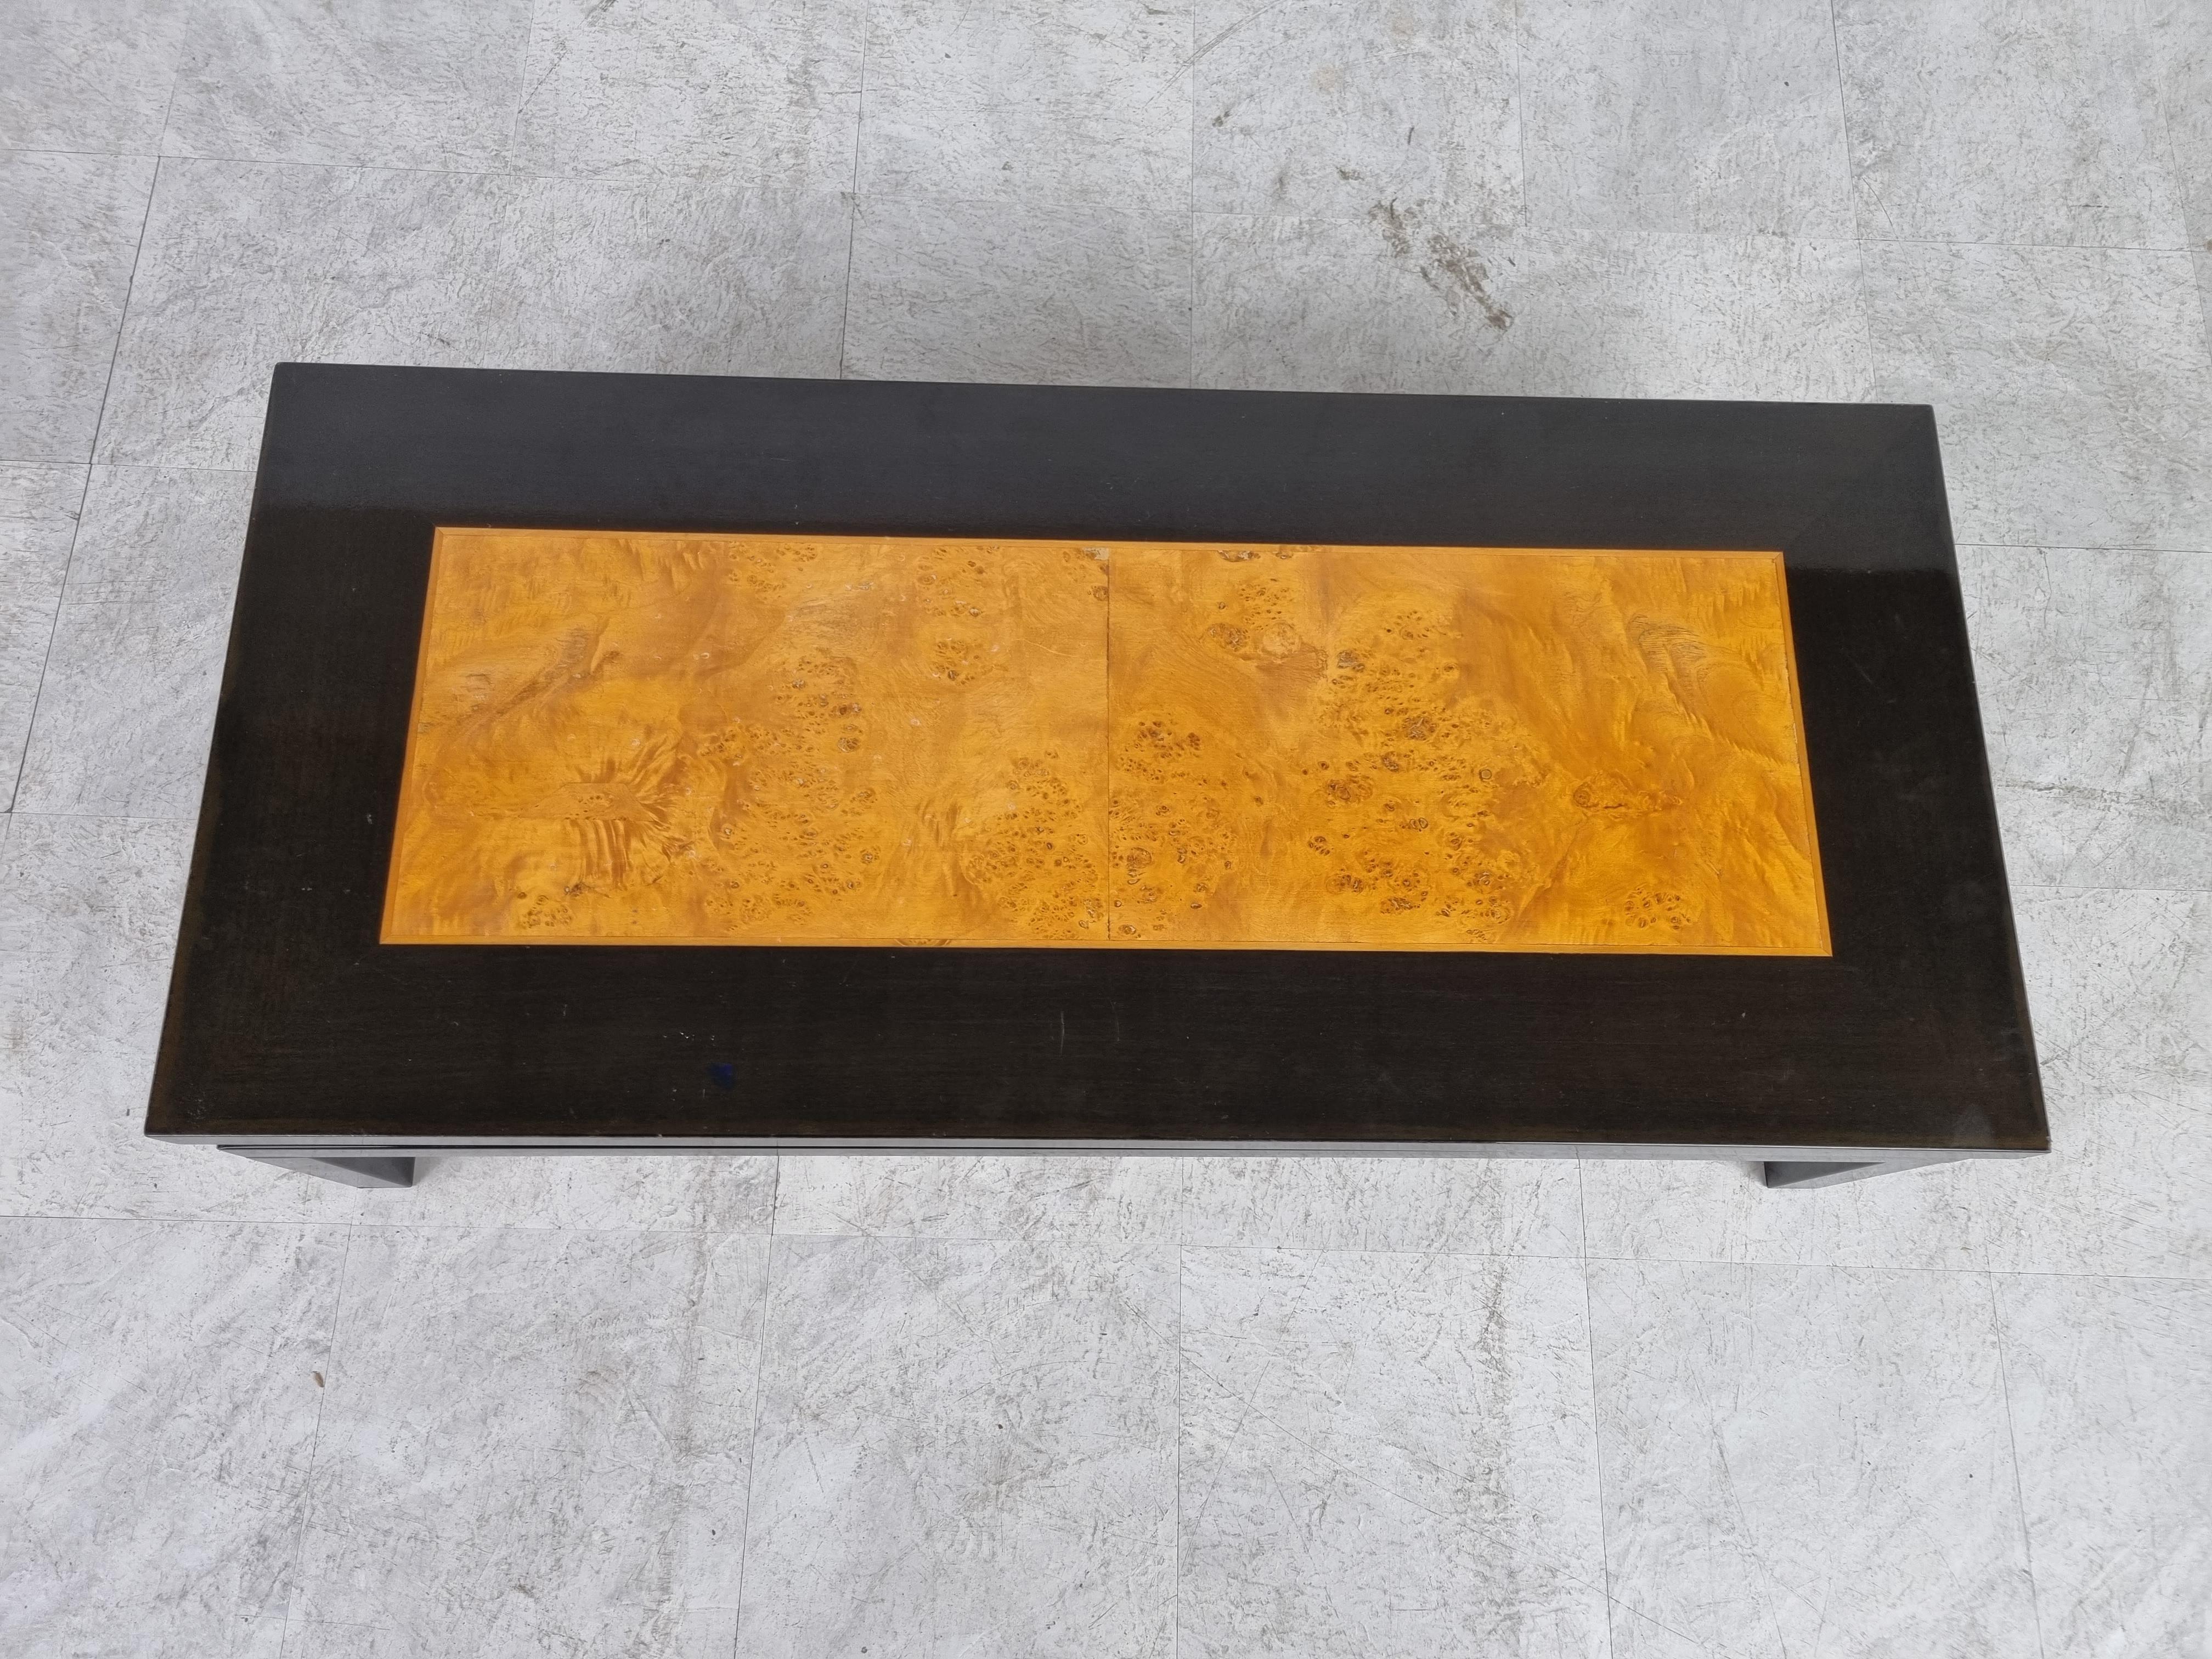 Late 20th Century Vintage Burl Wood and Lacquer Coffee Table, 1970s